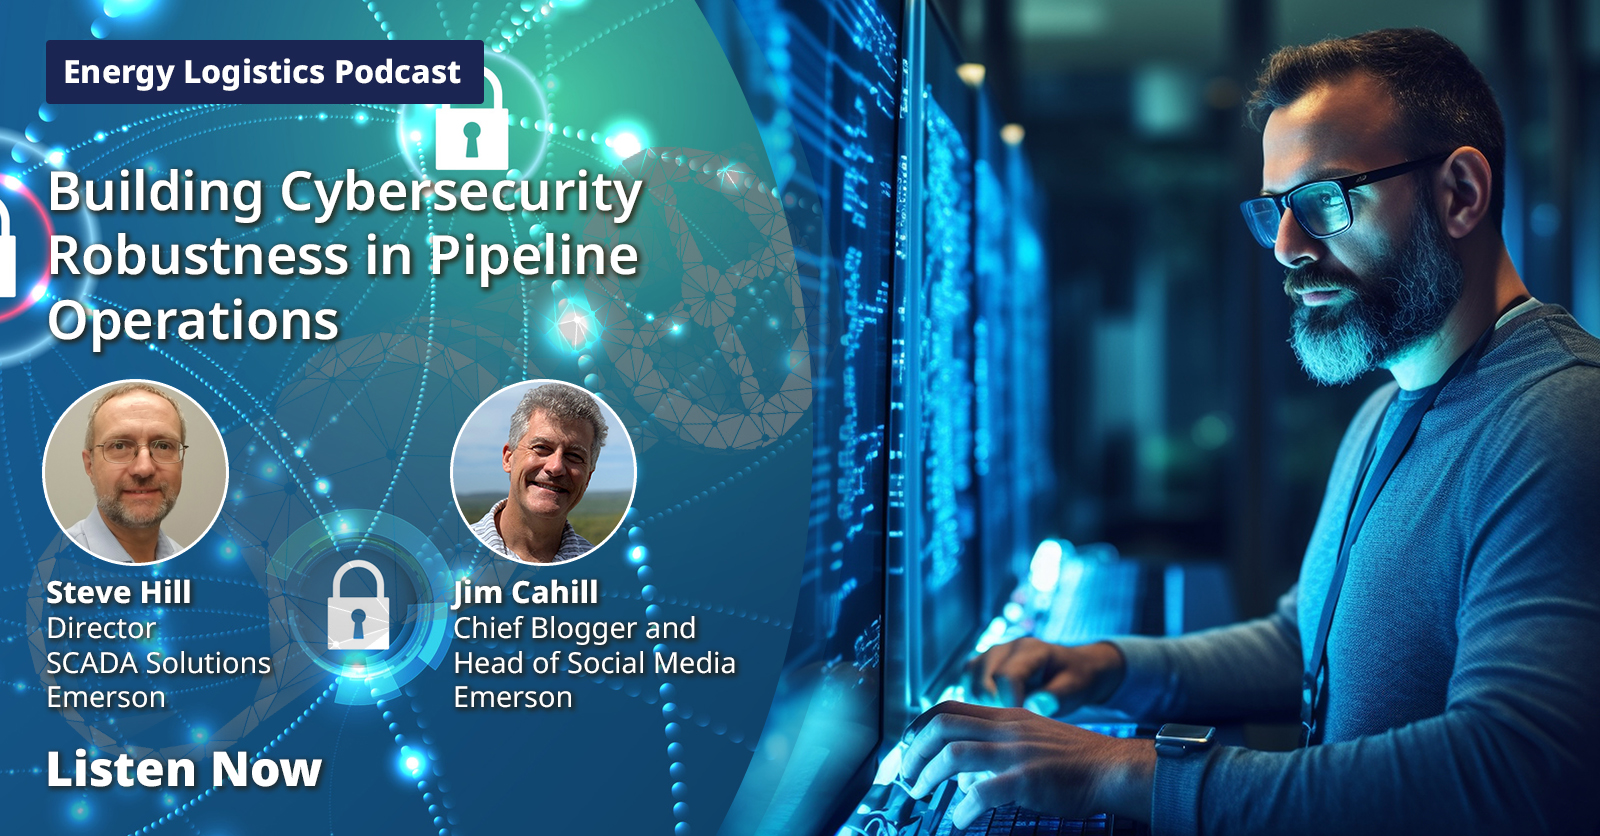 Building Cybersecurity Robustness in Pipeline Operations